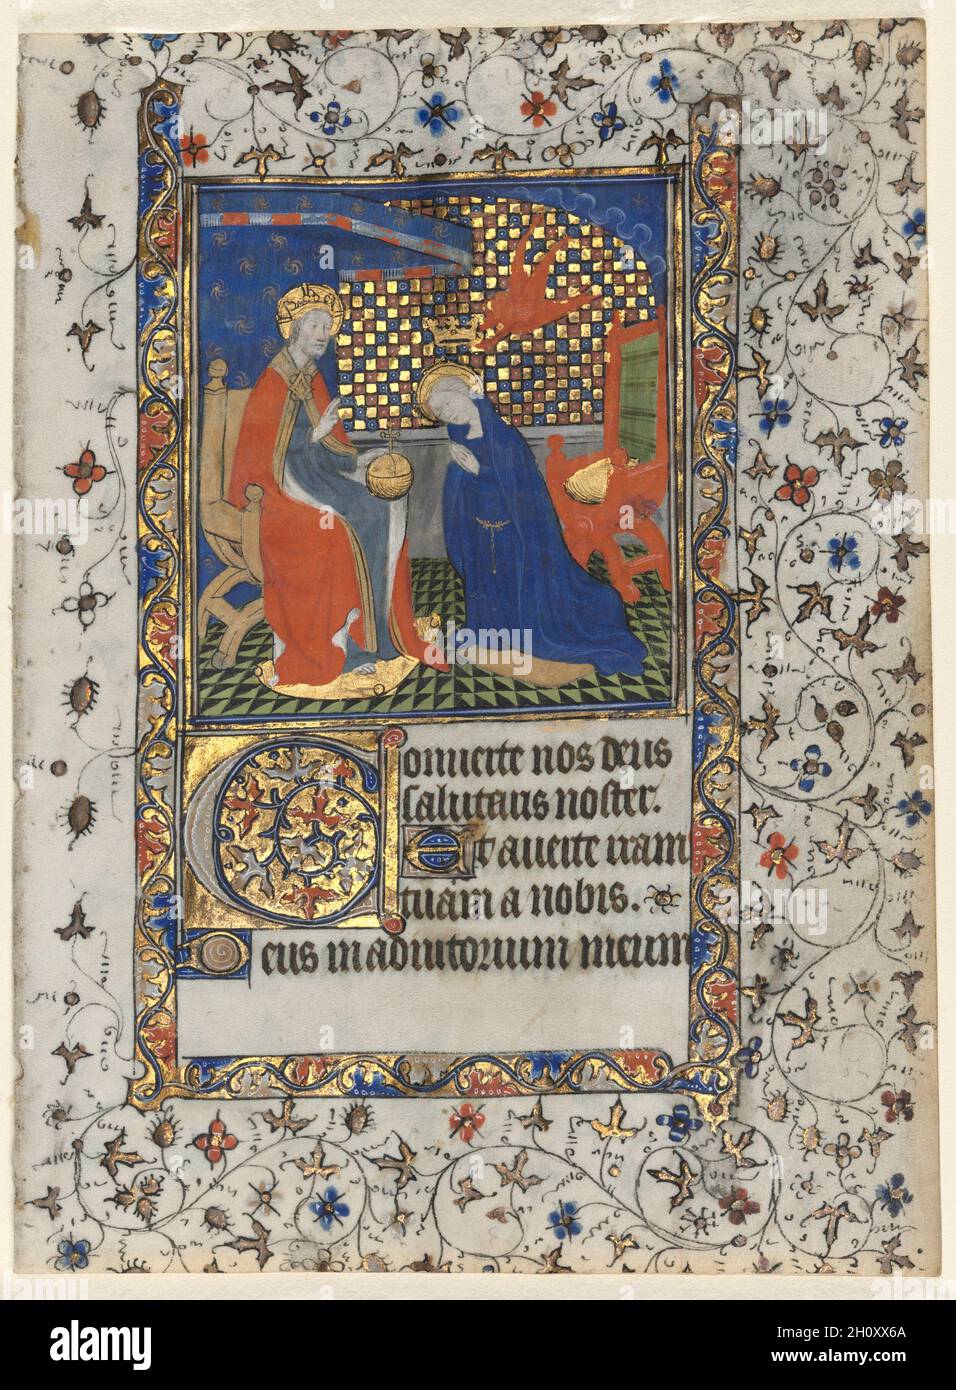 Bifolio from a Book of Hours: Coronation of the Virgin, c. 1415. Workshop of Boucicaut Master (French, Paris, active about 1410-25). Ink, tempera, and gold on vellum; folio: 17 x 12.5 cm (6 11/16 x 4 15/16 in.). Stock Photo